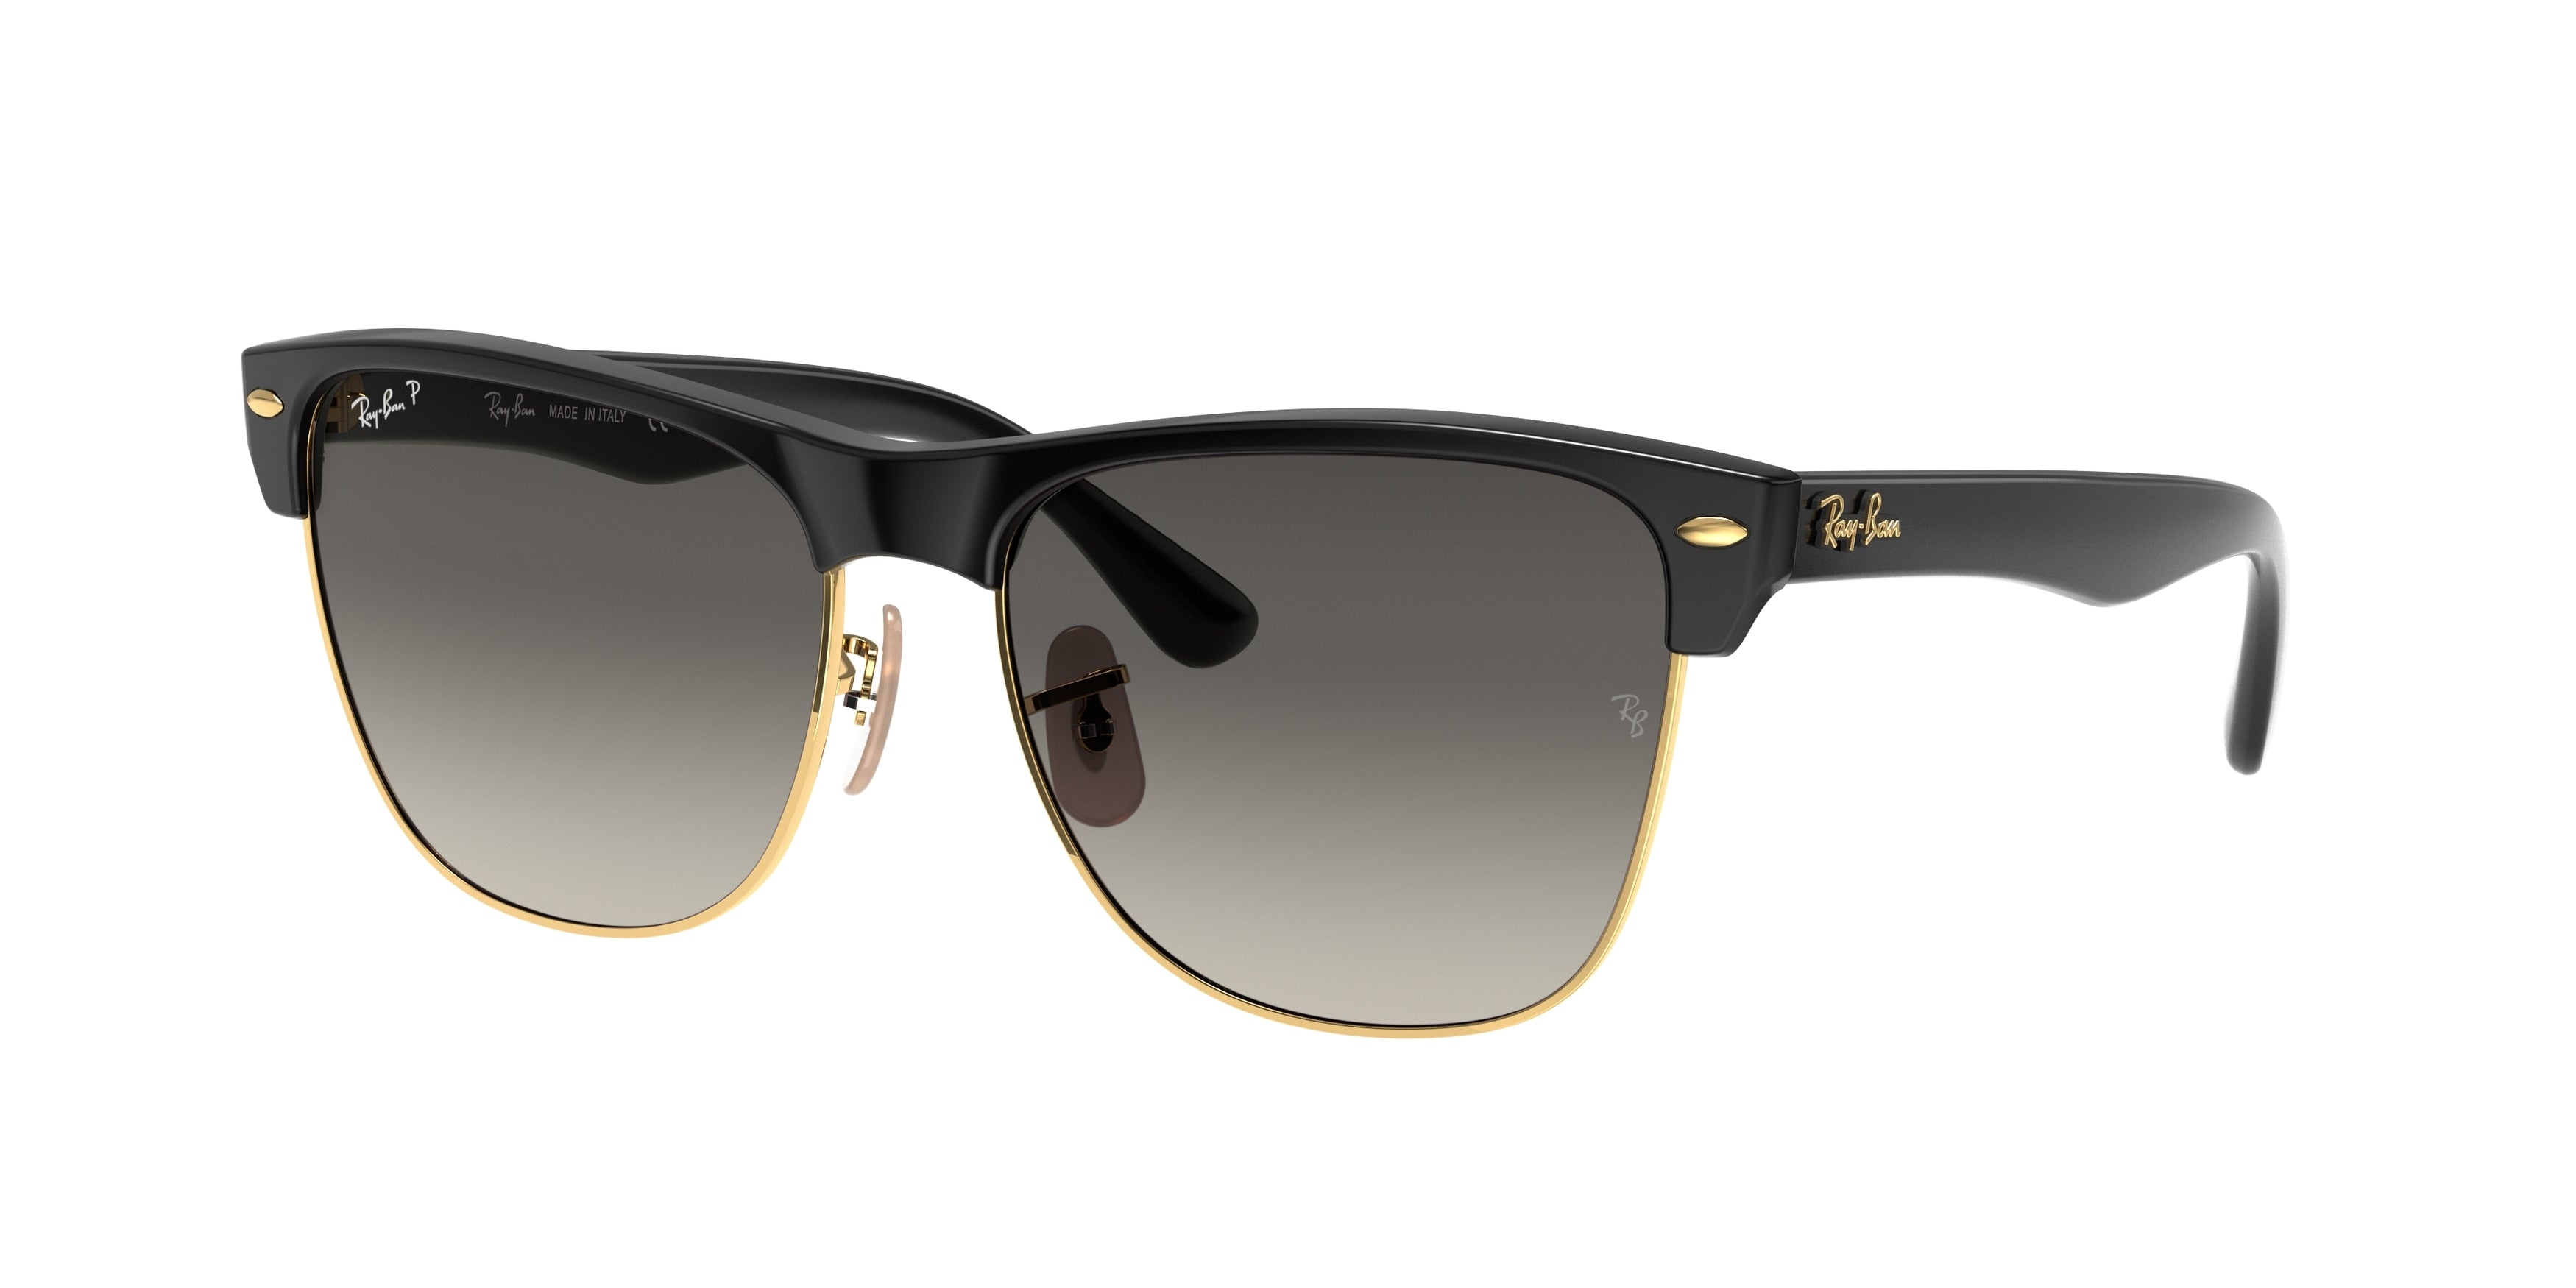 Ray-Ban CLUBMASTER OVERSIZED RB4175 Square Sunglasses  877/M3-Black 57-145-16 - Color Map Black